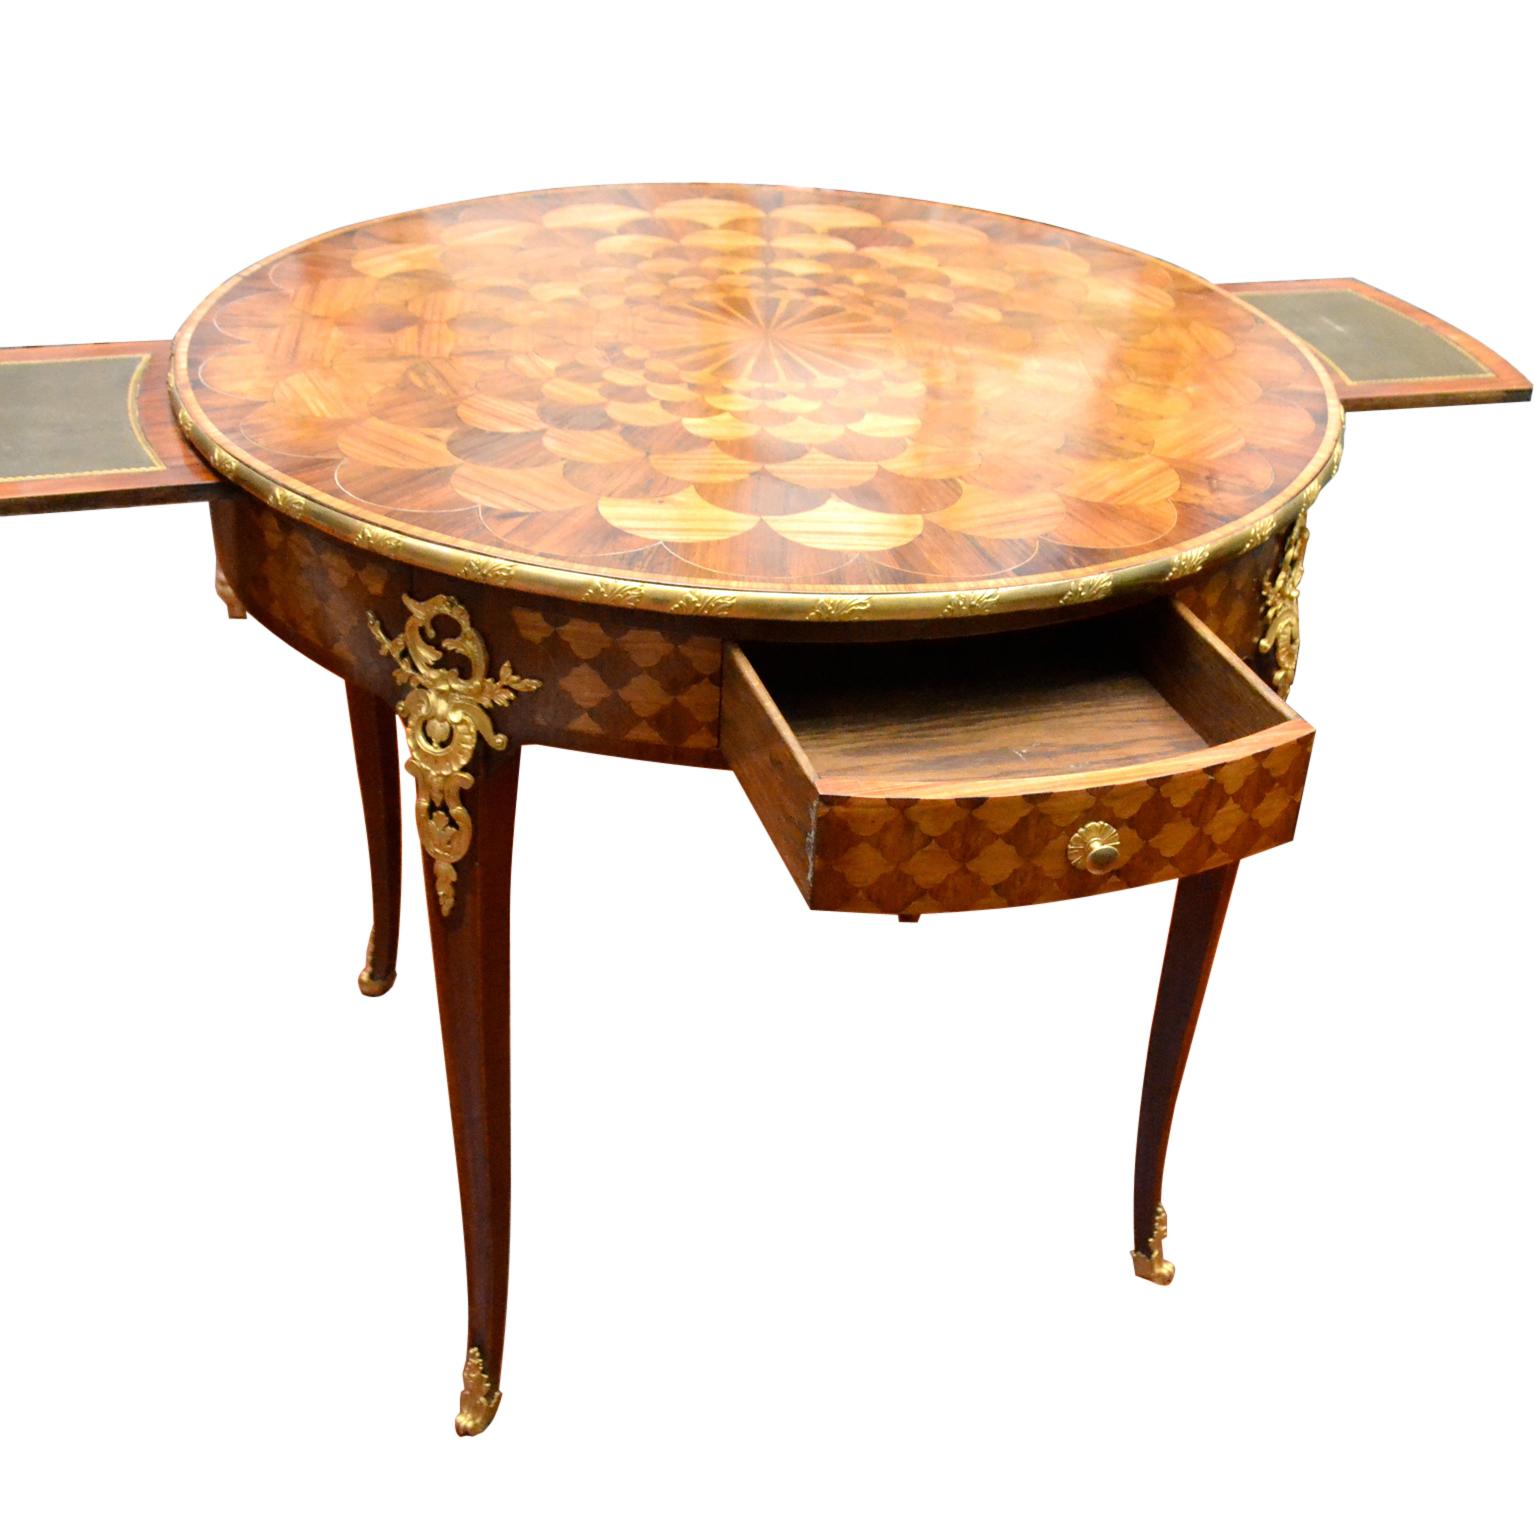 French, Marquetry and Gilt Bronze Round Centre Table Attributed to Linke 2